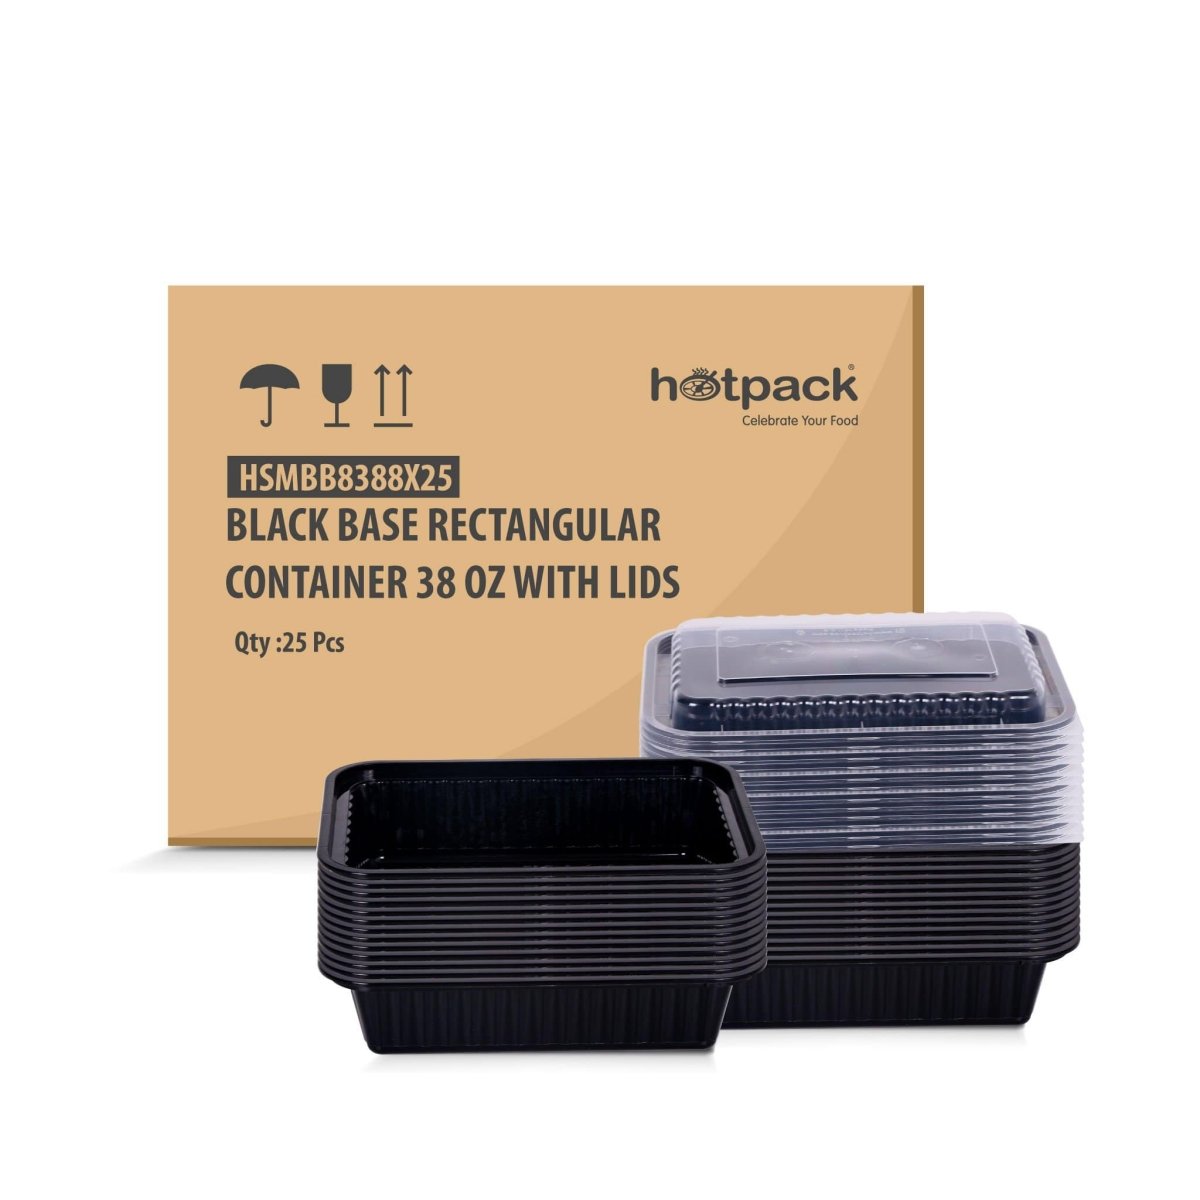 Black Base Container 38 oz with Lids 25 Pieces - hotpackwebstore.com - Plastic Products